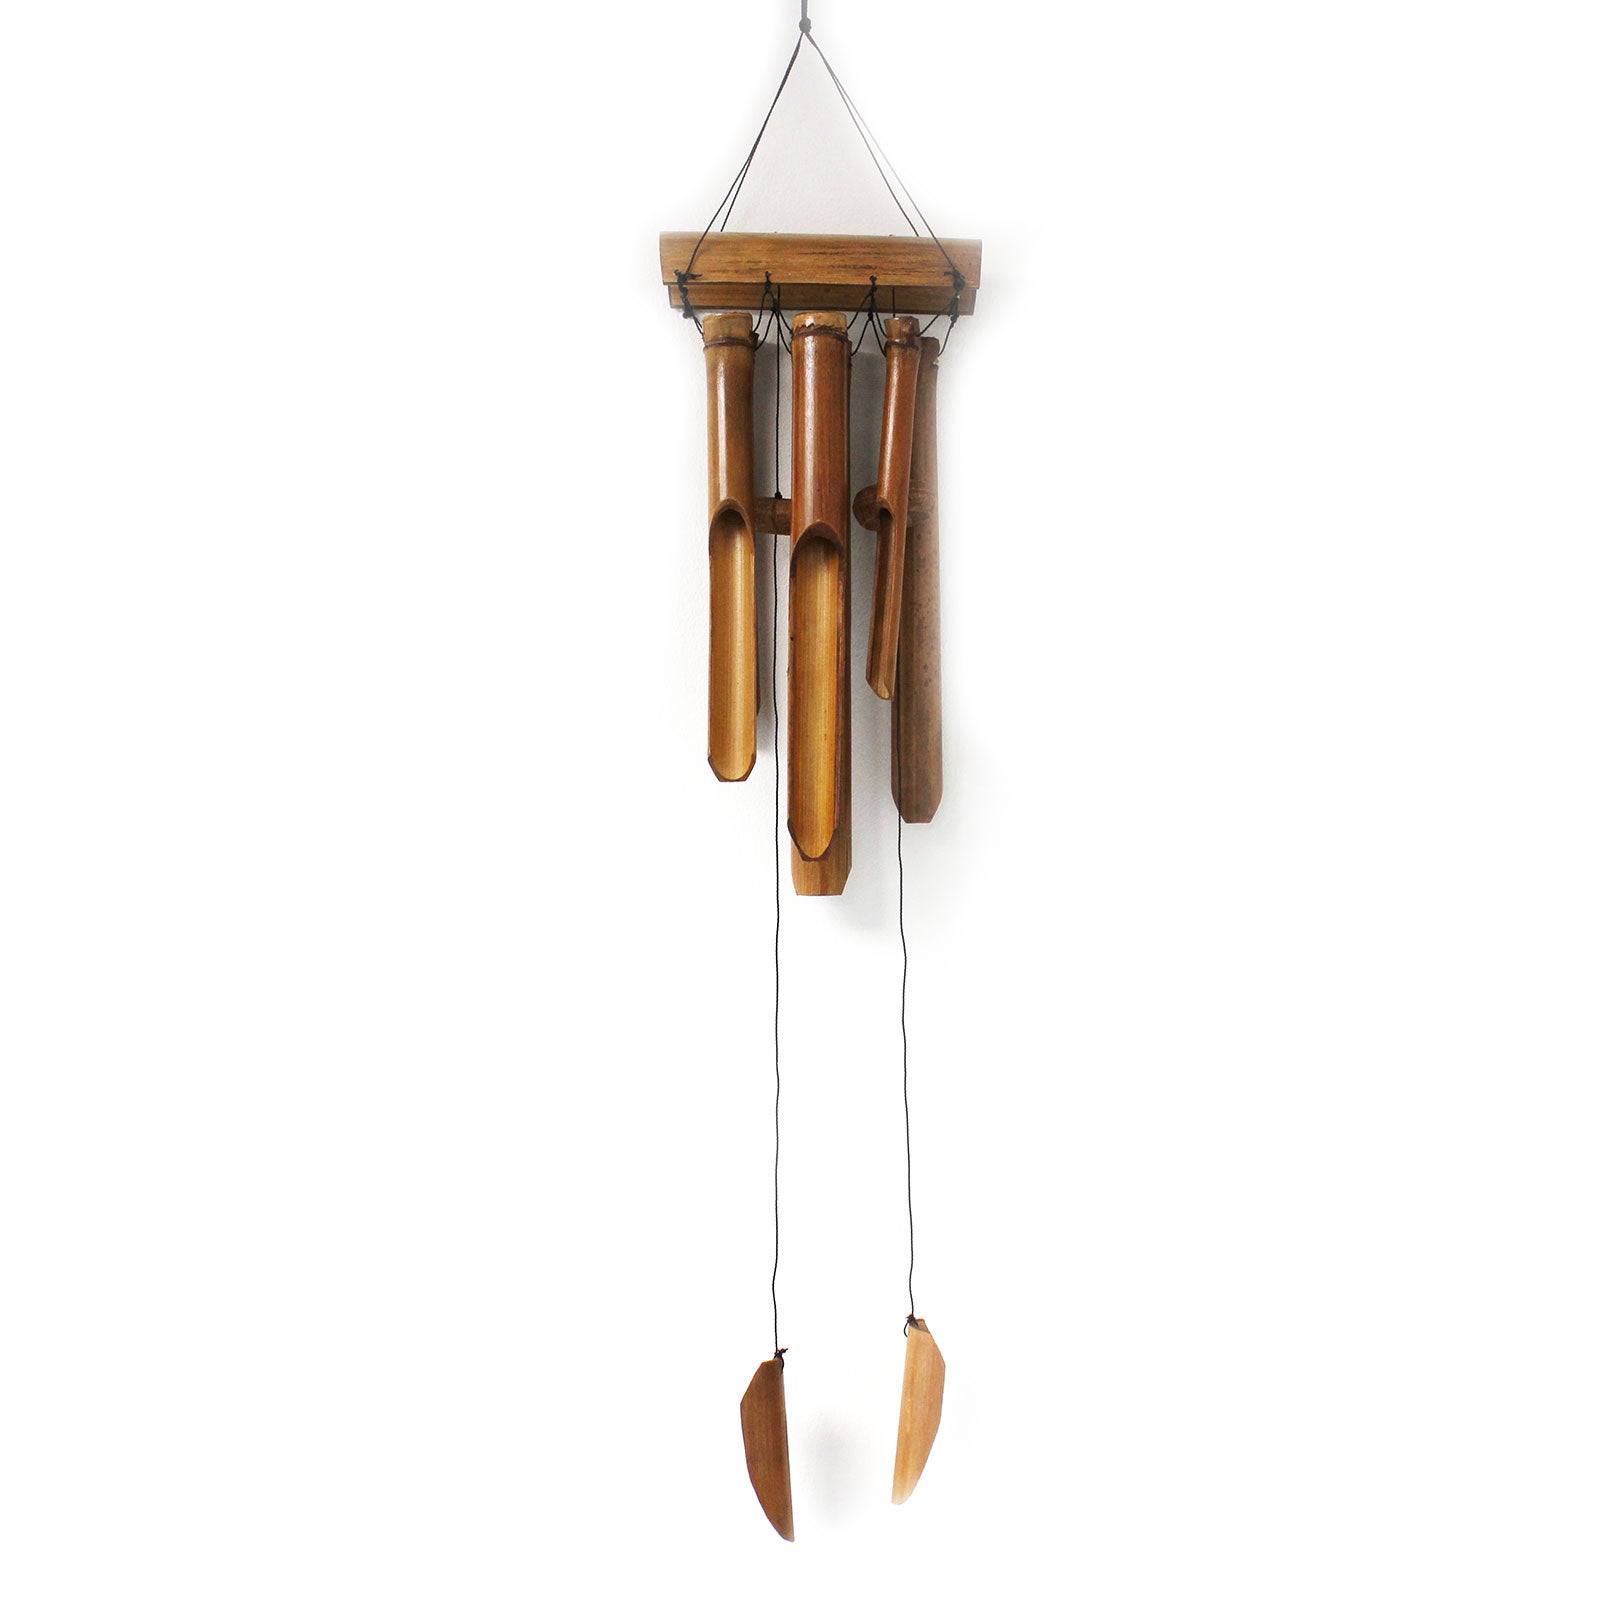 View Bamboo Windchime Natural finish 6 Large Tubes information